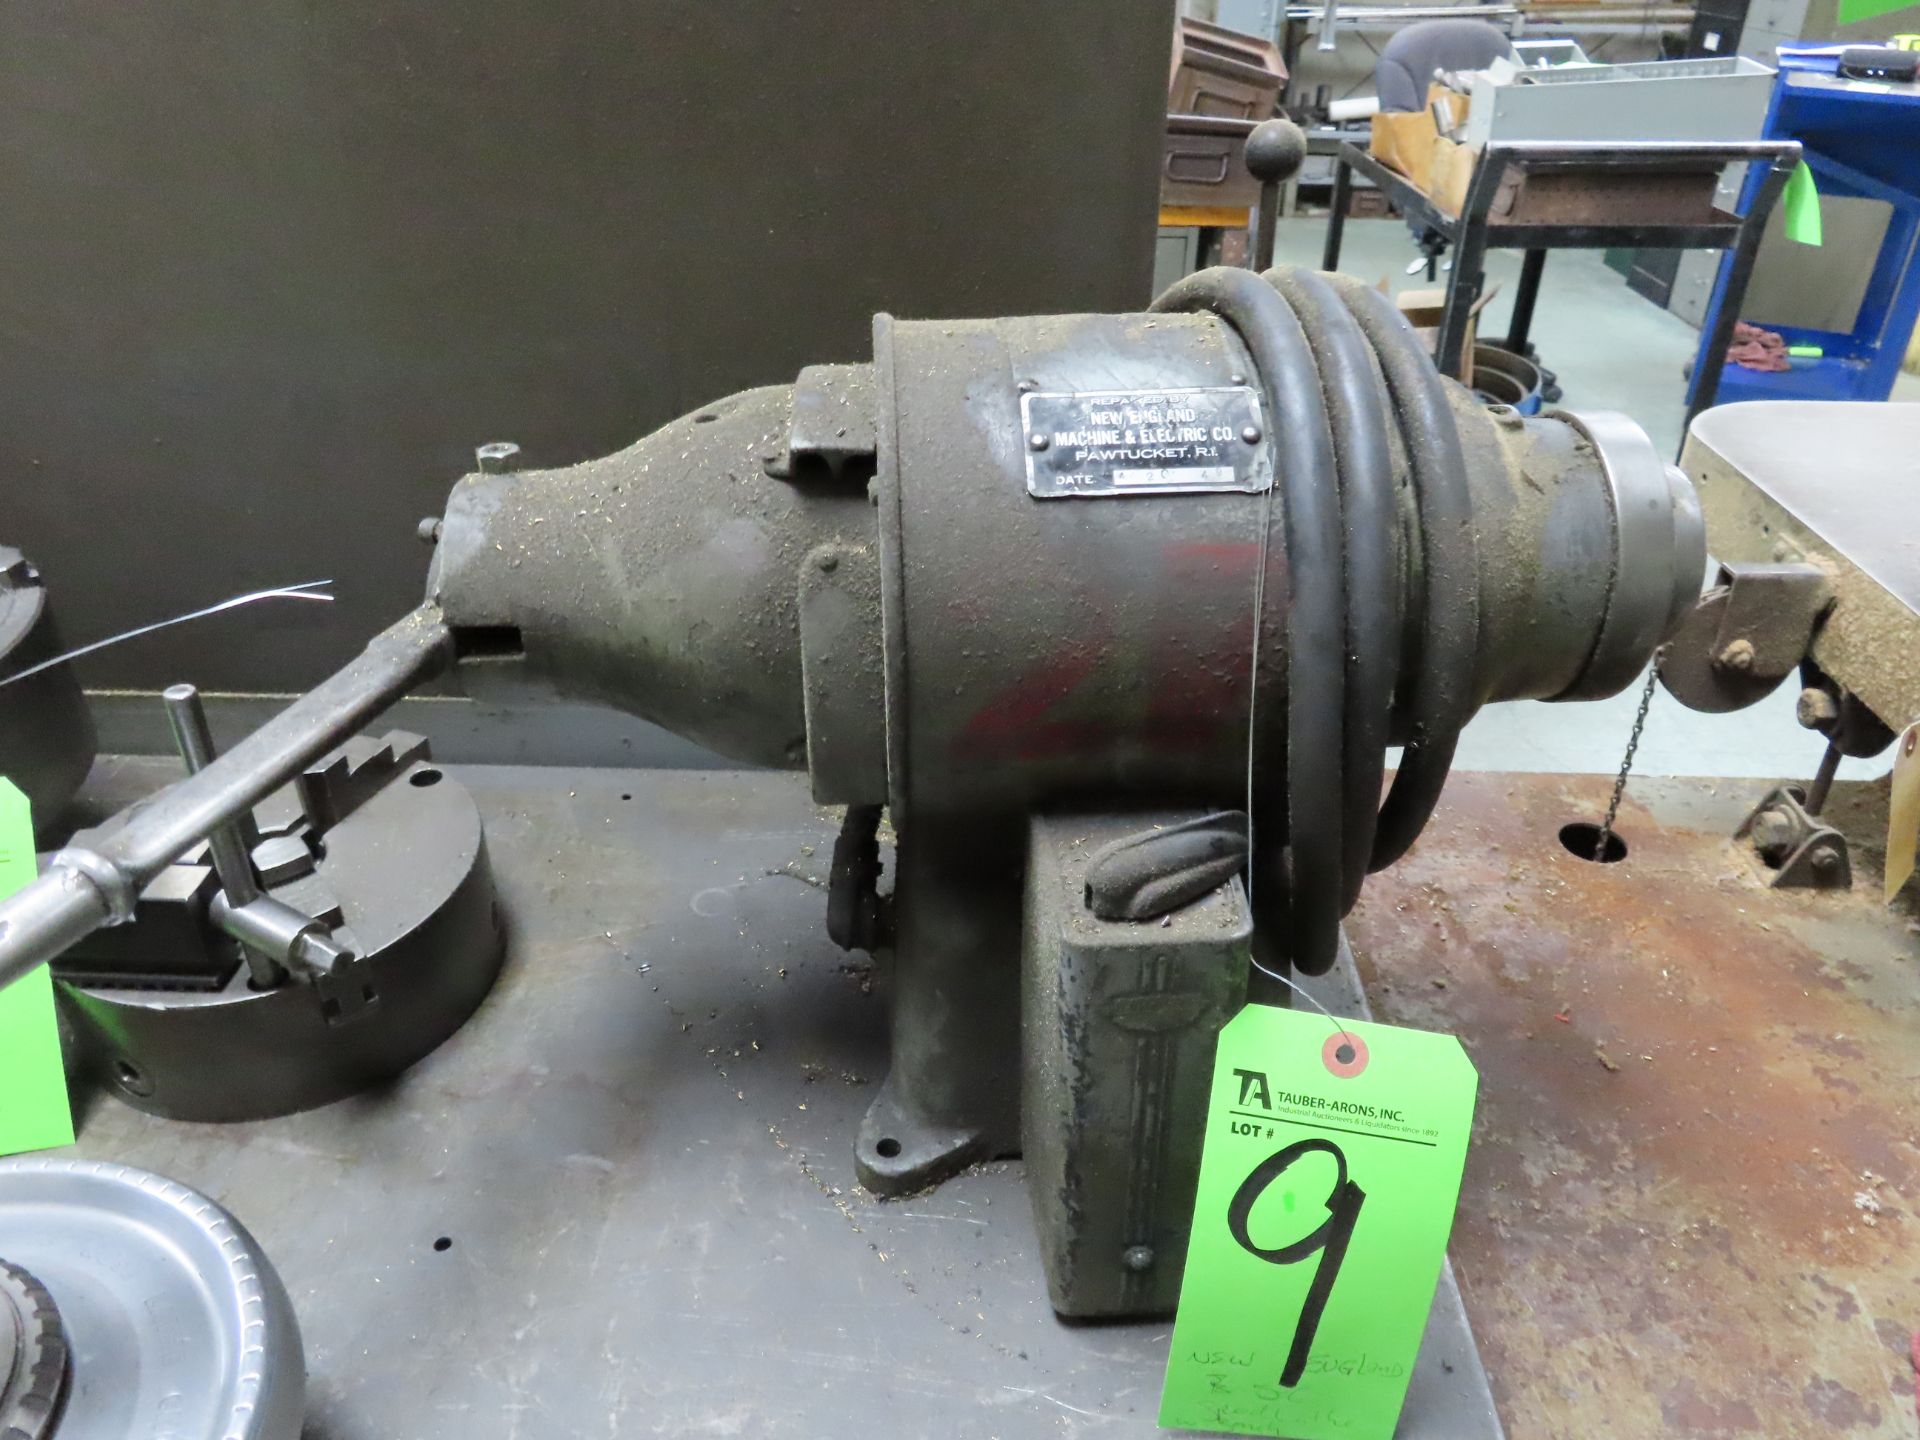 New England 5-C Spindle Lathe w/ Bench